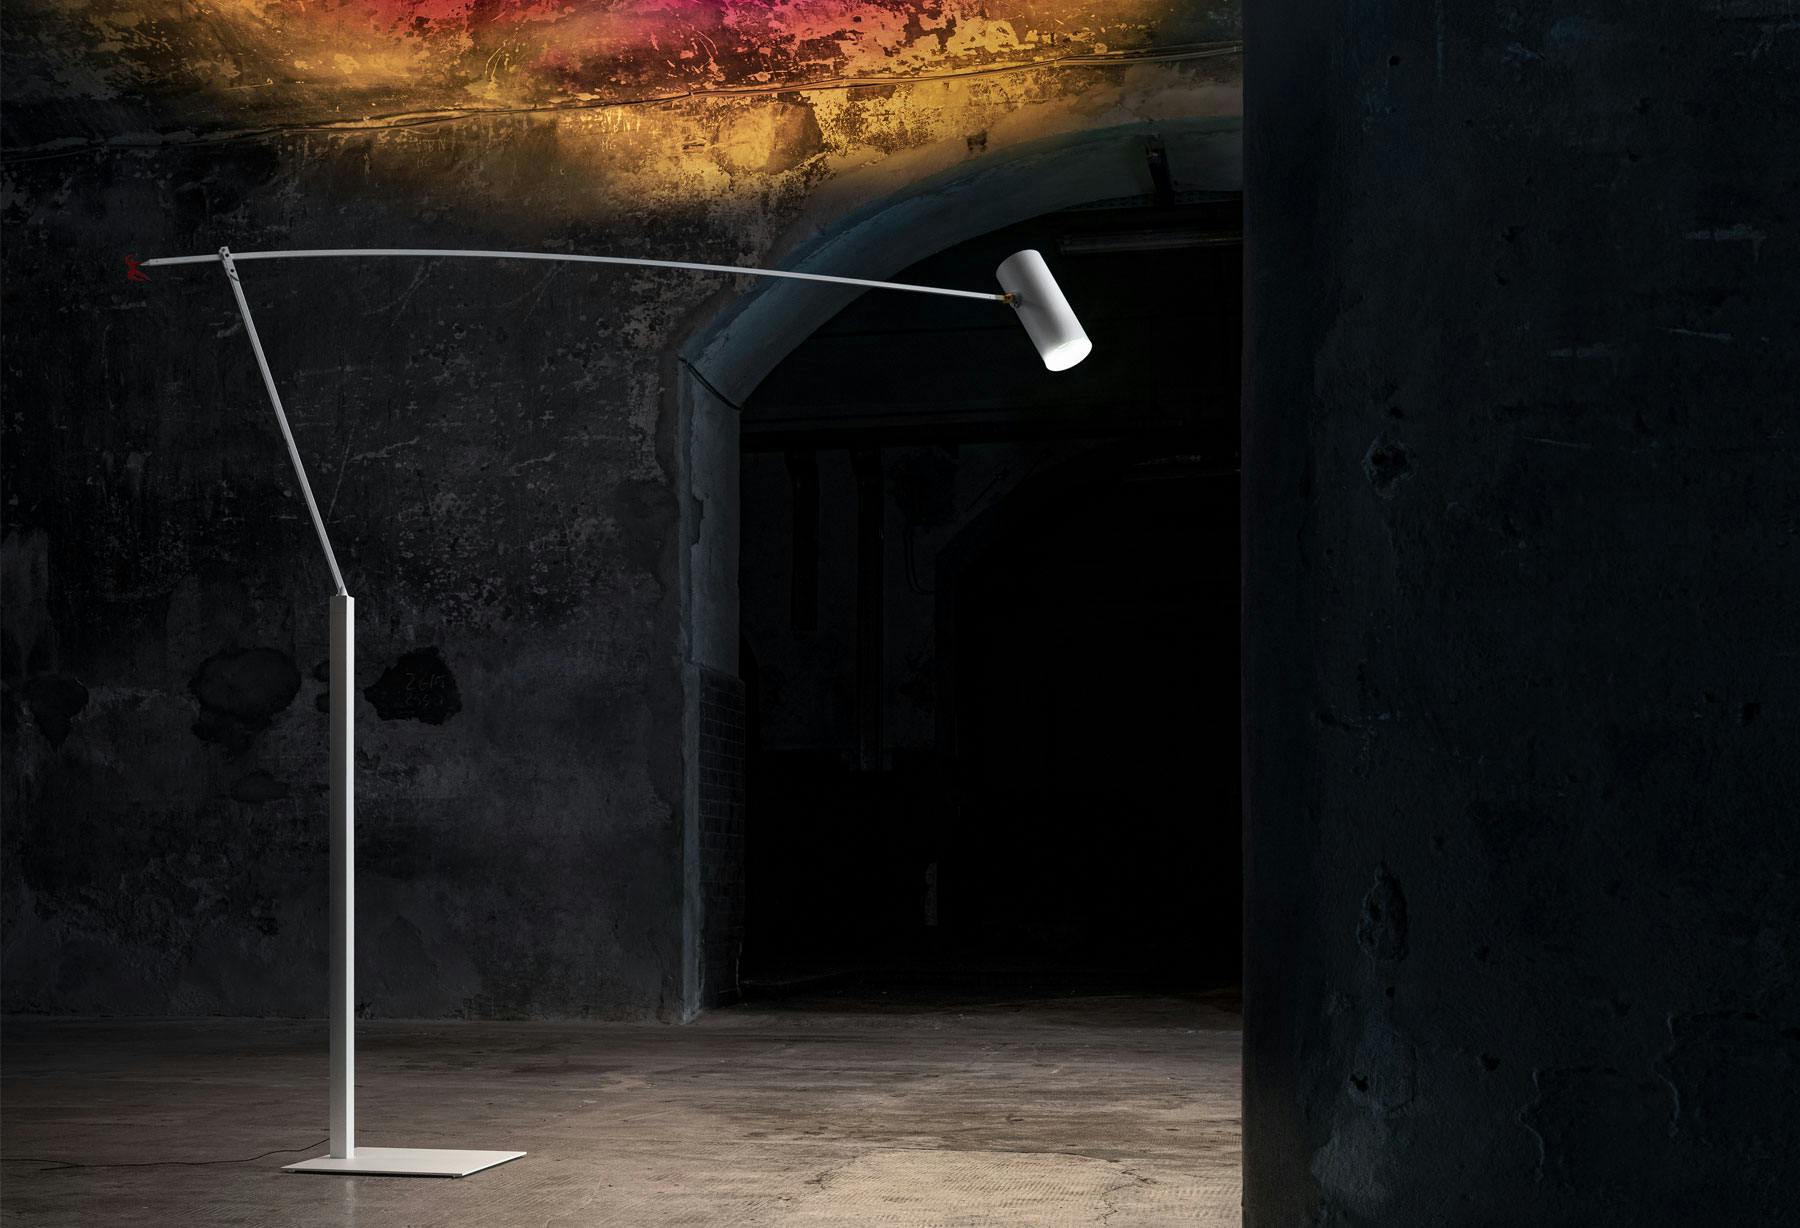 <p>“Ettorino BIG” is among the winners in the lighting category at the ADA (Archiproducts Design Awards).</p>
